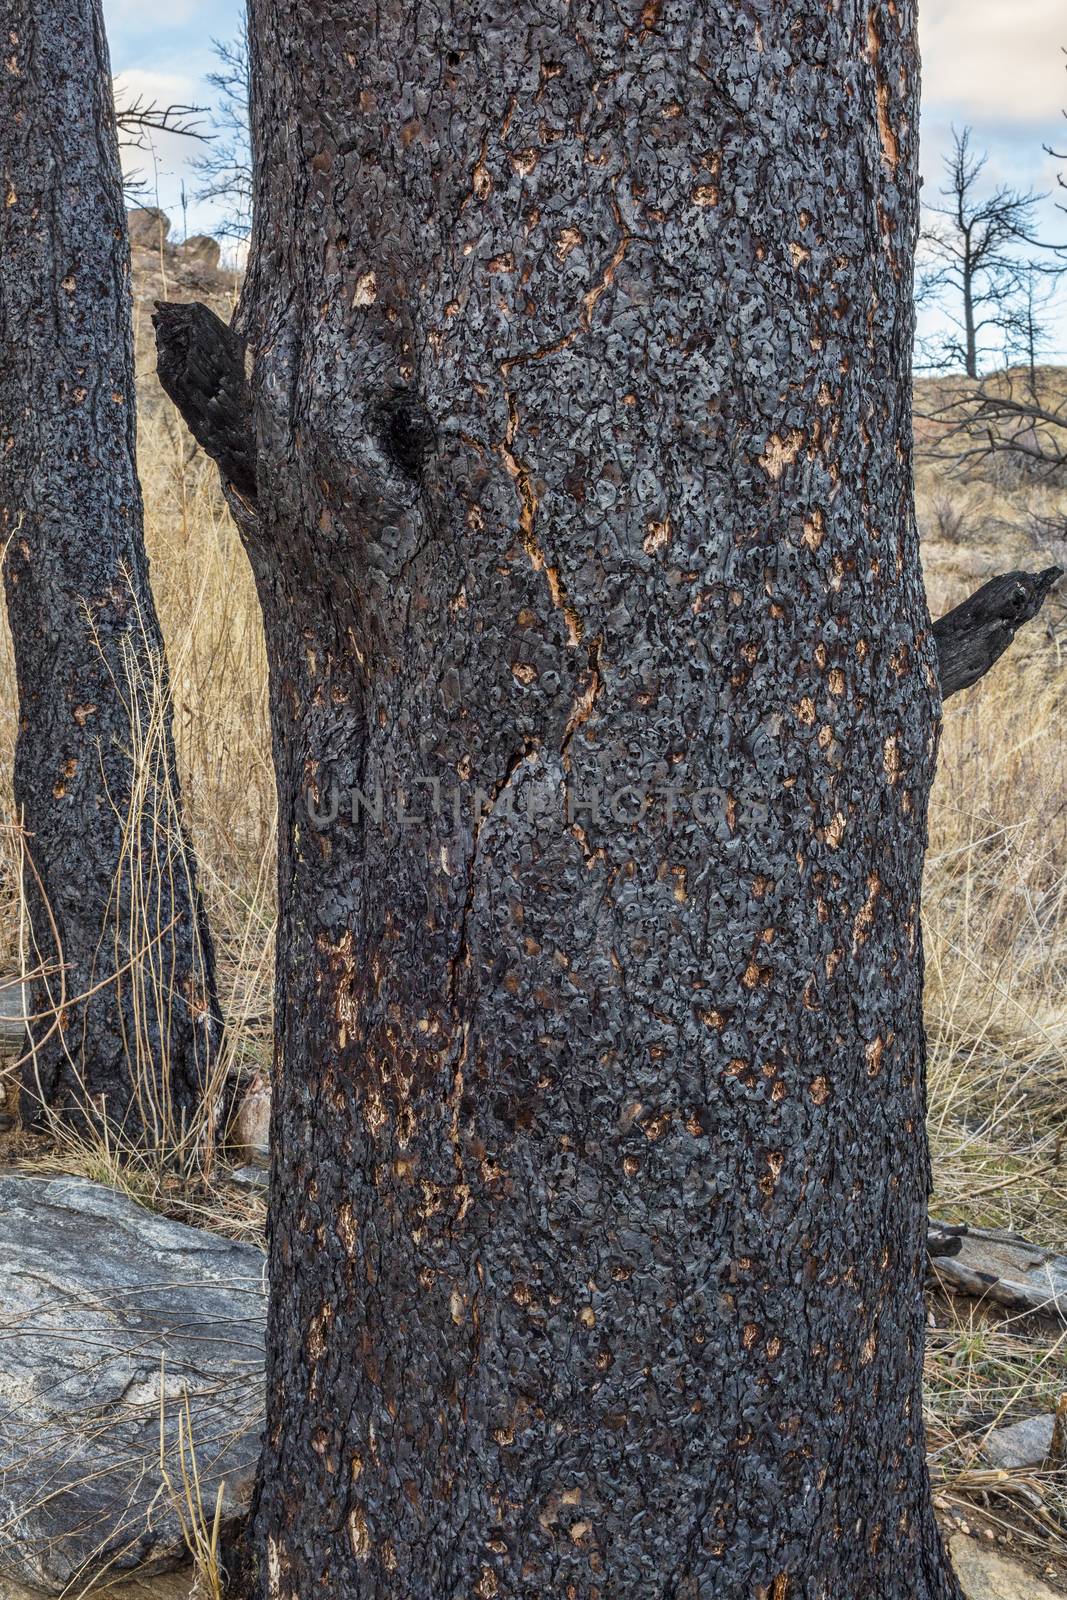 pine tree trunks damaged by recent wildfire in Rocky Mountains near Fort Collins, Colorado